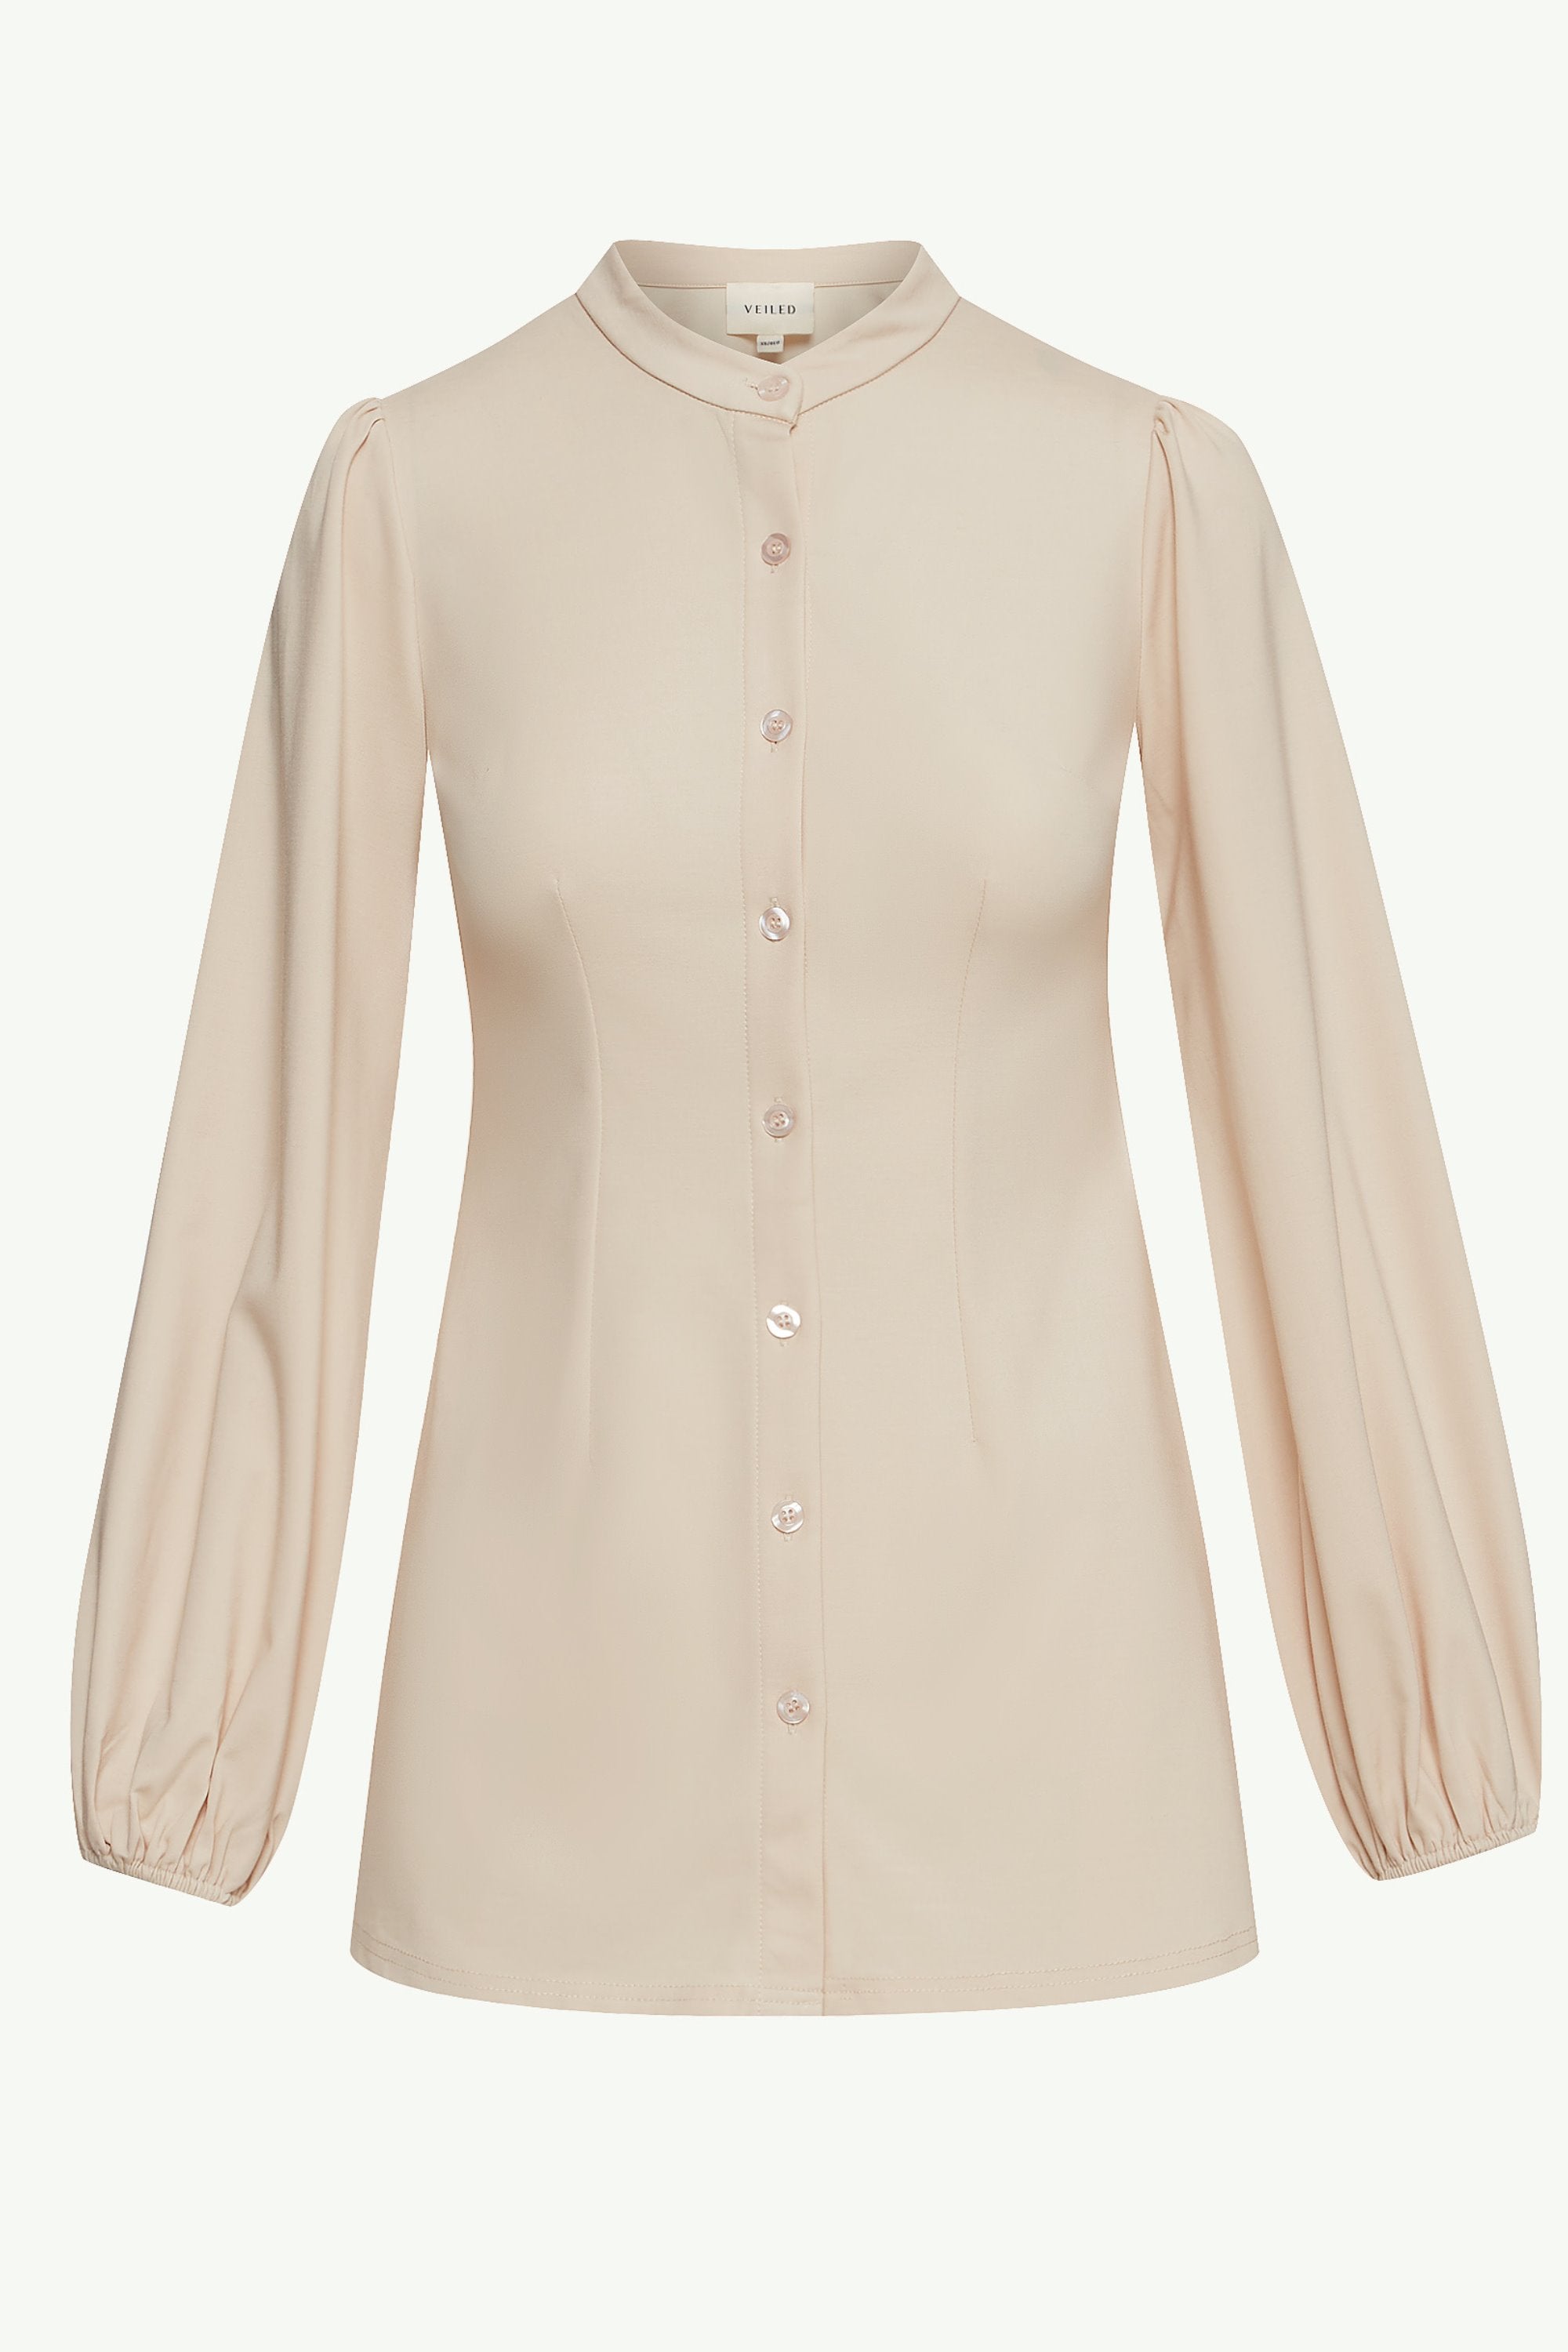 Rayana Jersey Button Down Top - Light Sand Clothing epschoolboard 